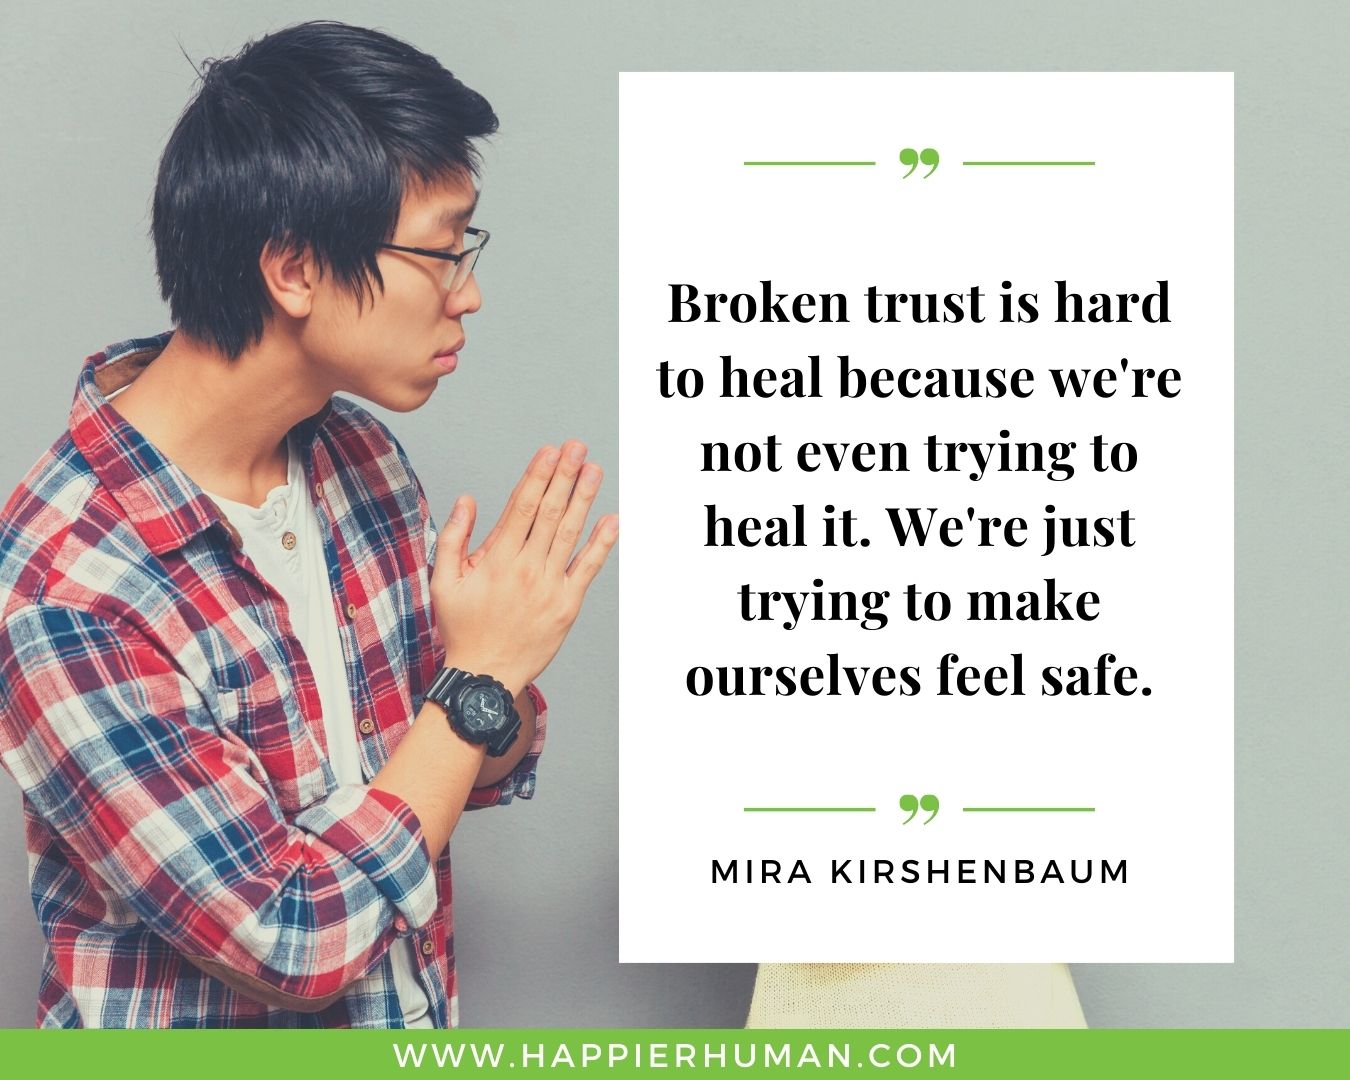 Broken Trust Quotes - “Broken trust is hard to heal because we're not even trying to heal it. We're just trying to make ourselves feel safe.” - Mira Kirshenbaum